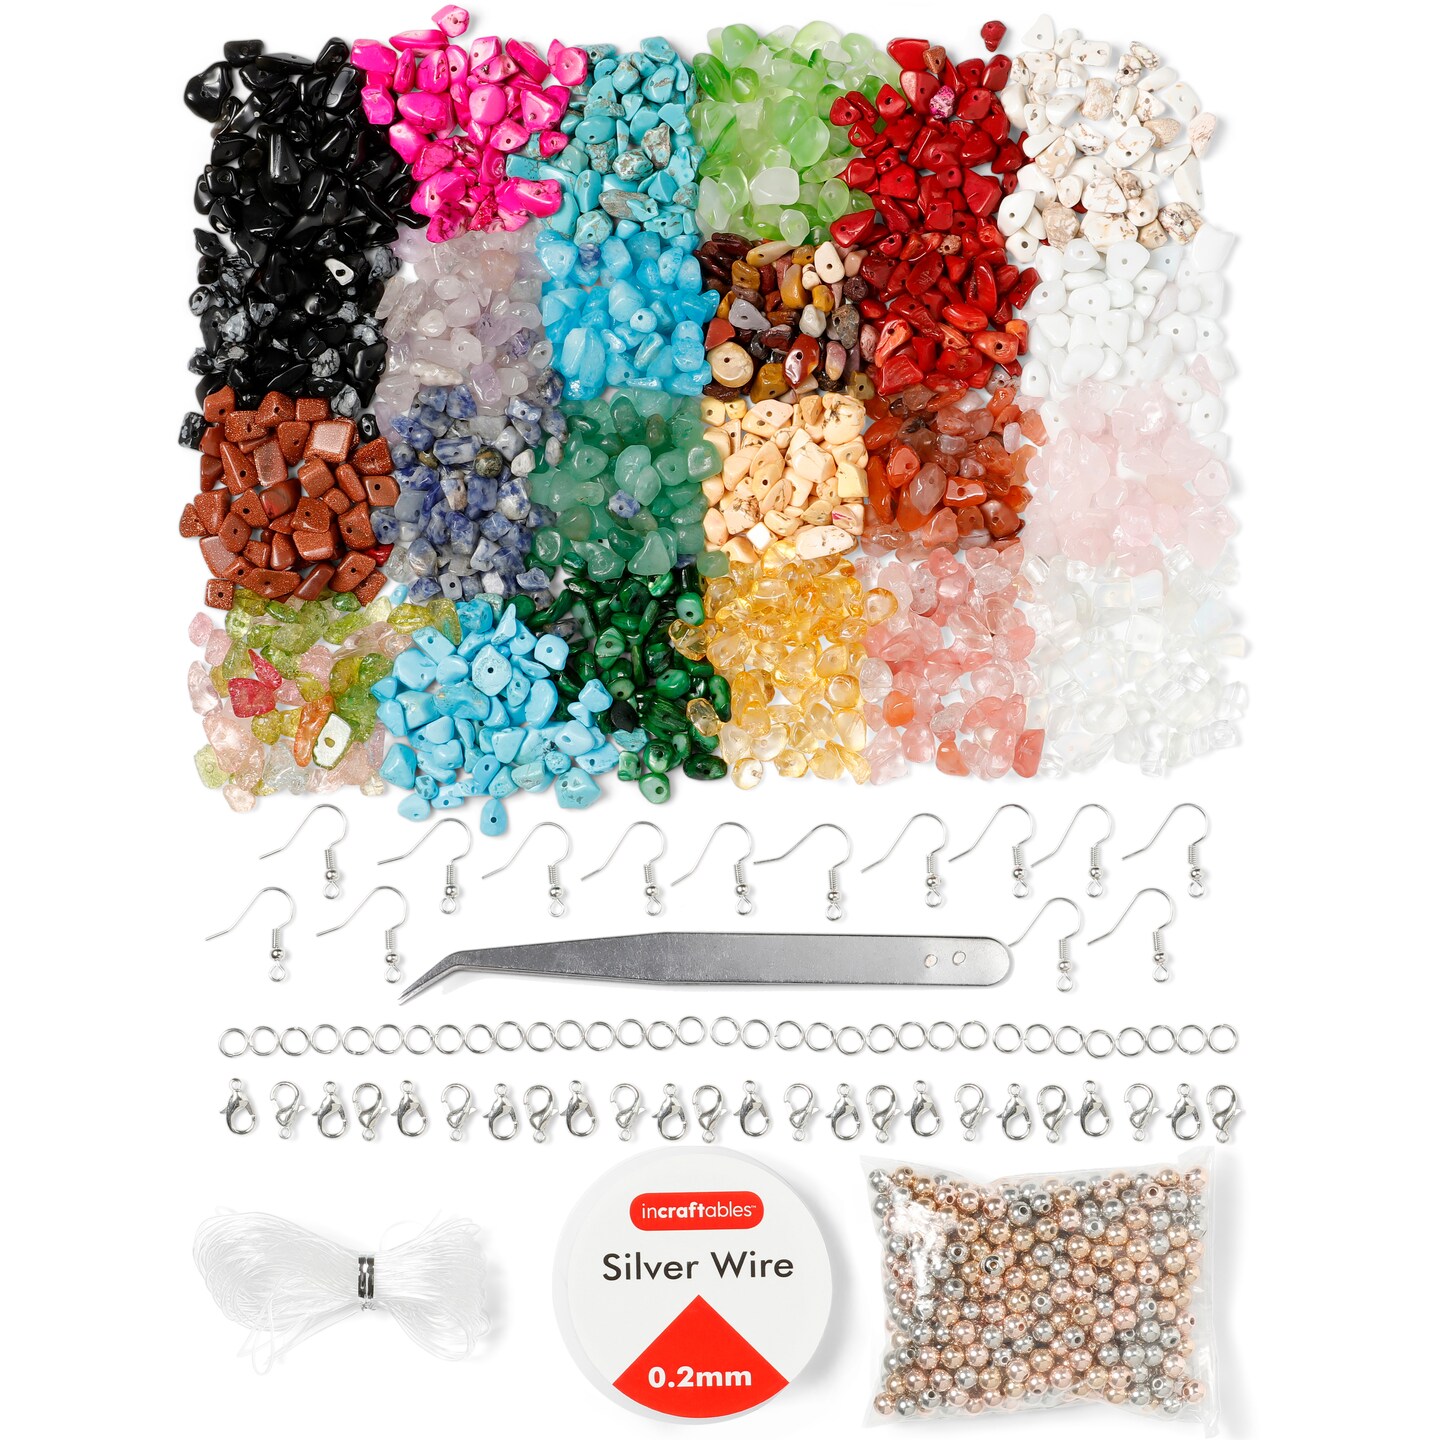 Incraftables 1000pcs Crystal Gemstone Beads for Jewelry Making (24 Colors).  Best Natural Stone Chips Kit with Spacer Bead, Silver Wire, Elastic String,  Earrings & Organizer for DIY Crafts & Bracelet